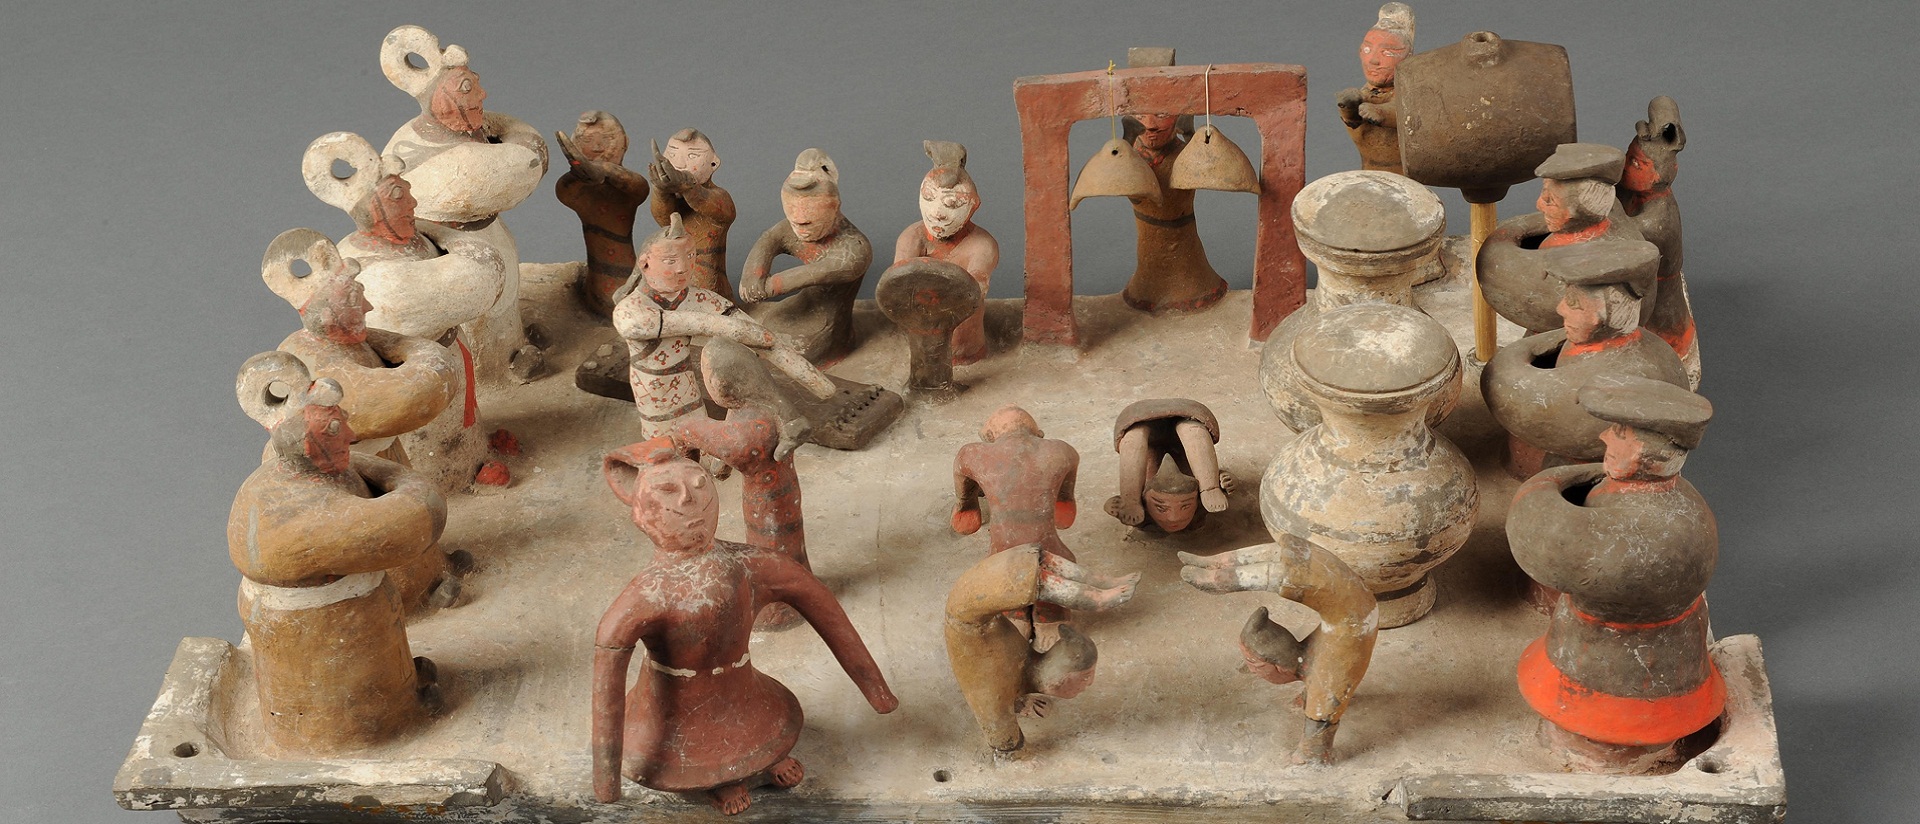 Performance from Western Han Dynasty 'captured' in pottery